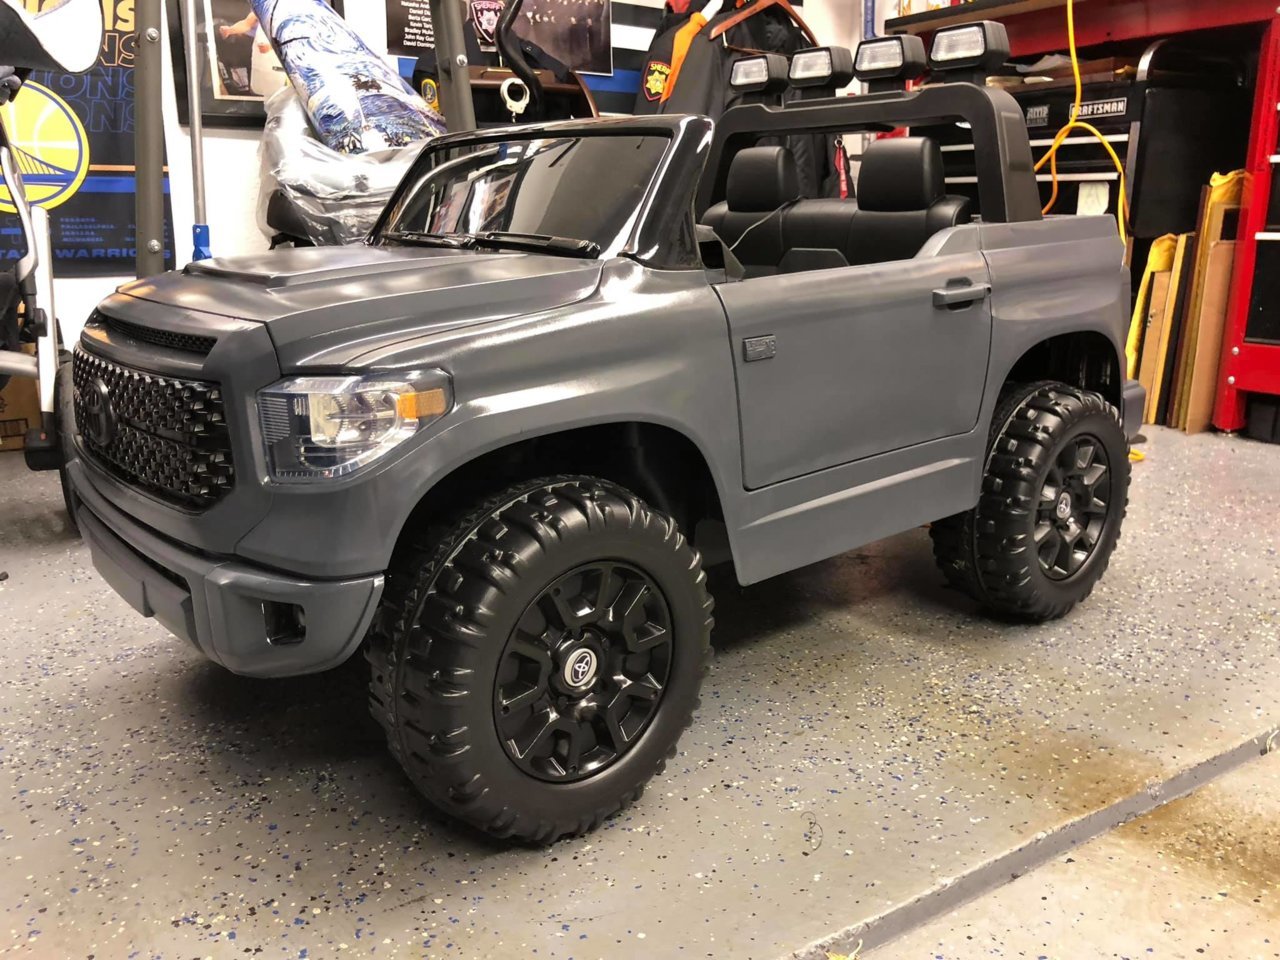 Purchased my son his first TUNDRA